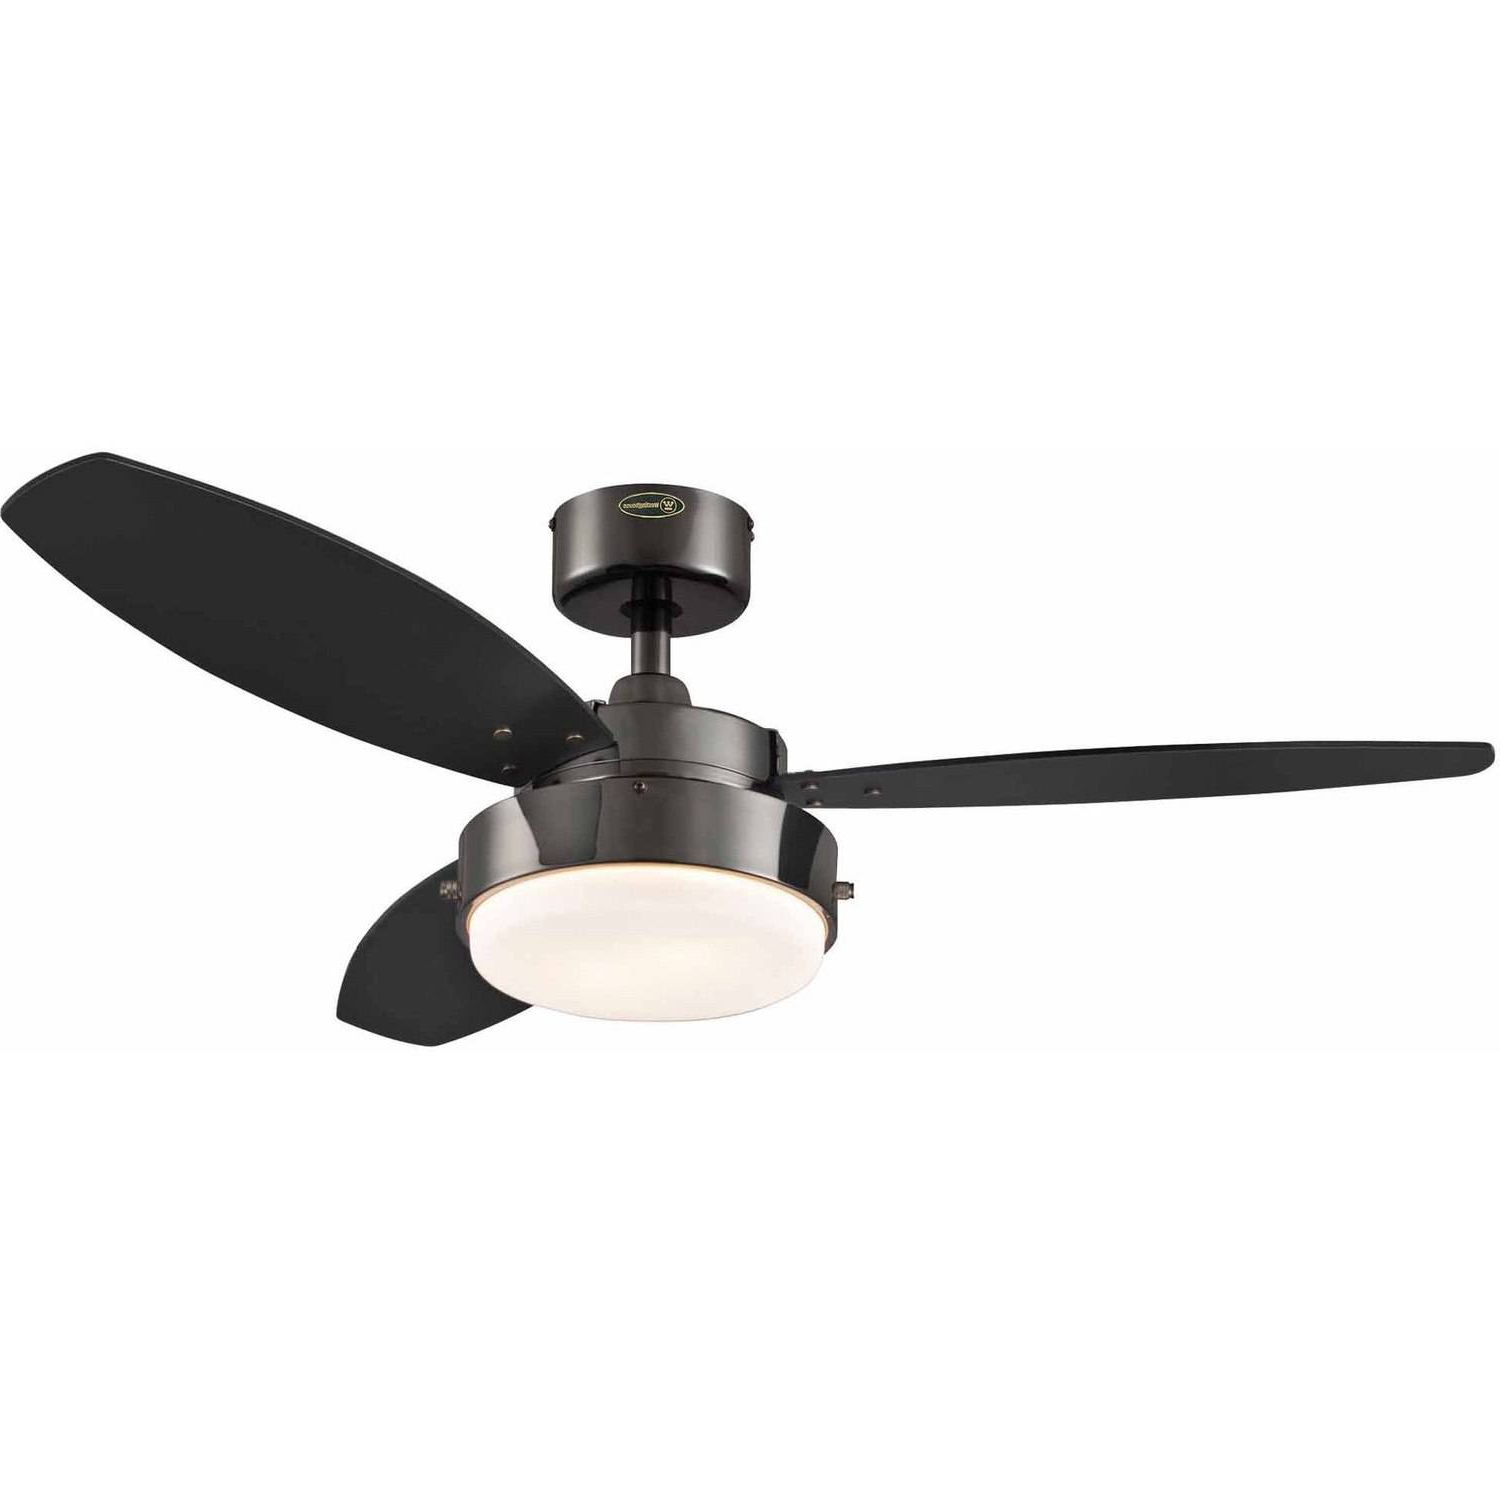 Sherwood 3 Blade Ceiling Fans Within Famous Ceiling : Remarkable Three Blade Ceiling Fan Ceilings (View 20 of 20)